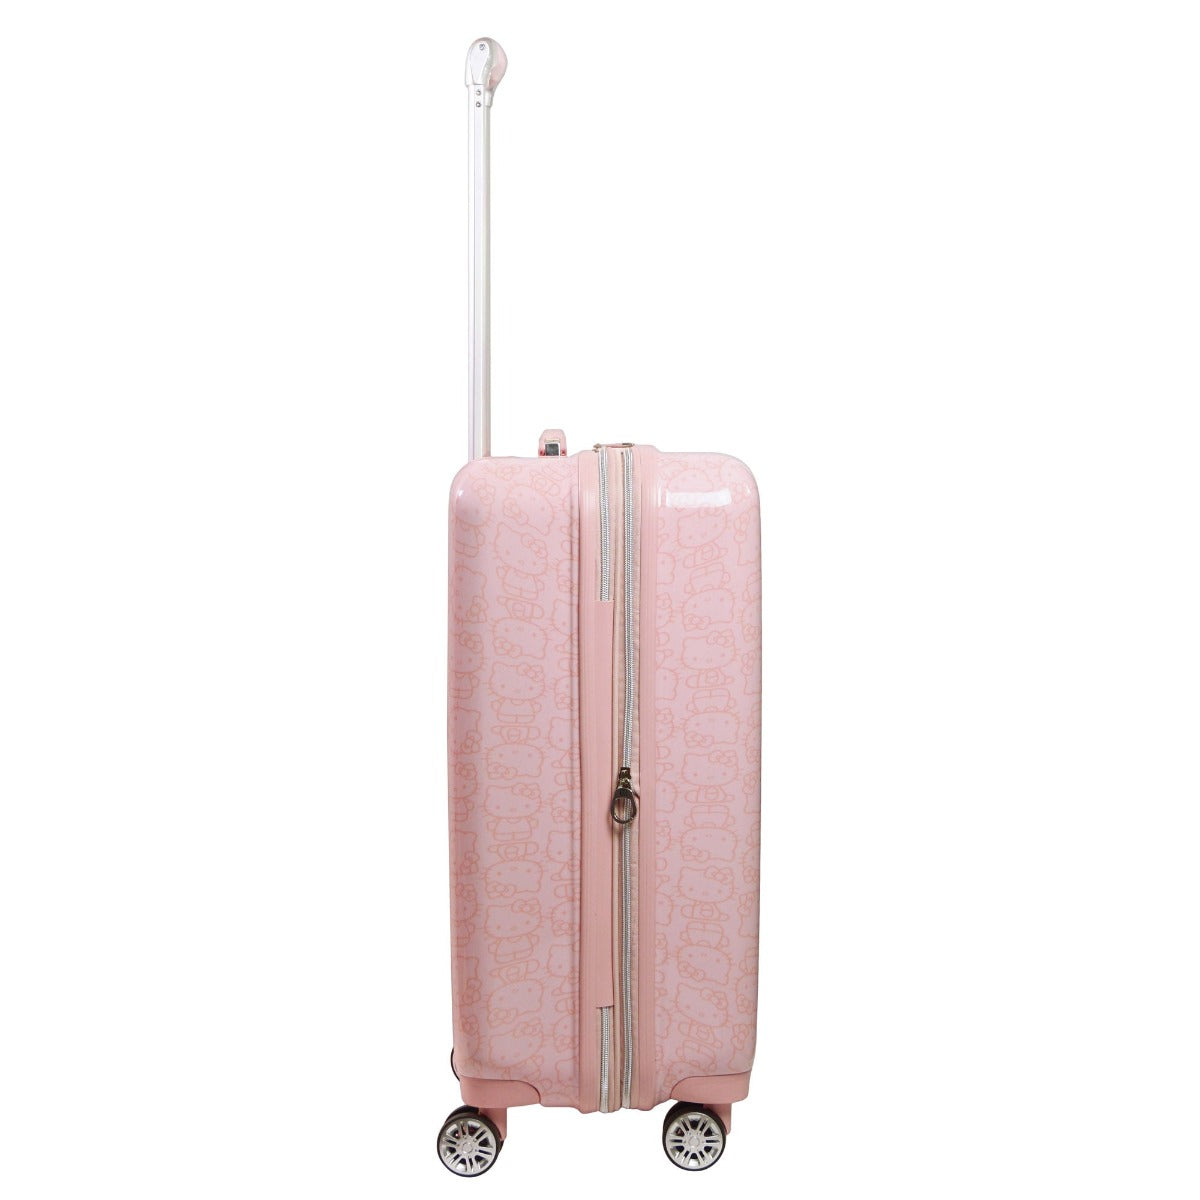 Hello Kitty Pose All Over Print 25.5 inch Hardsided Checked Luggage Pink Spinner suitcase